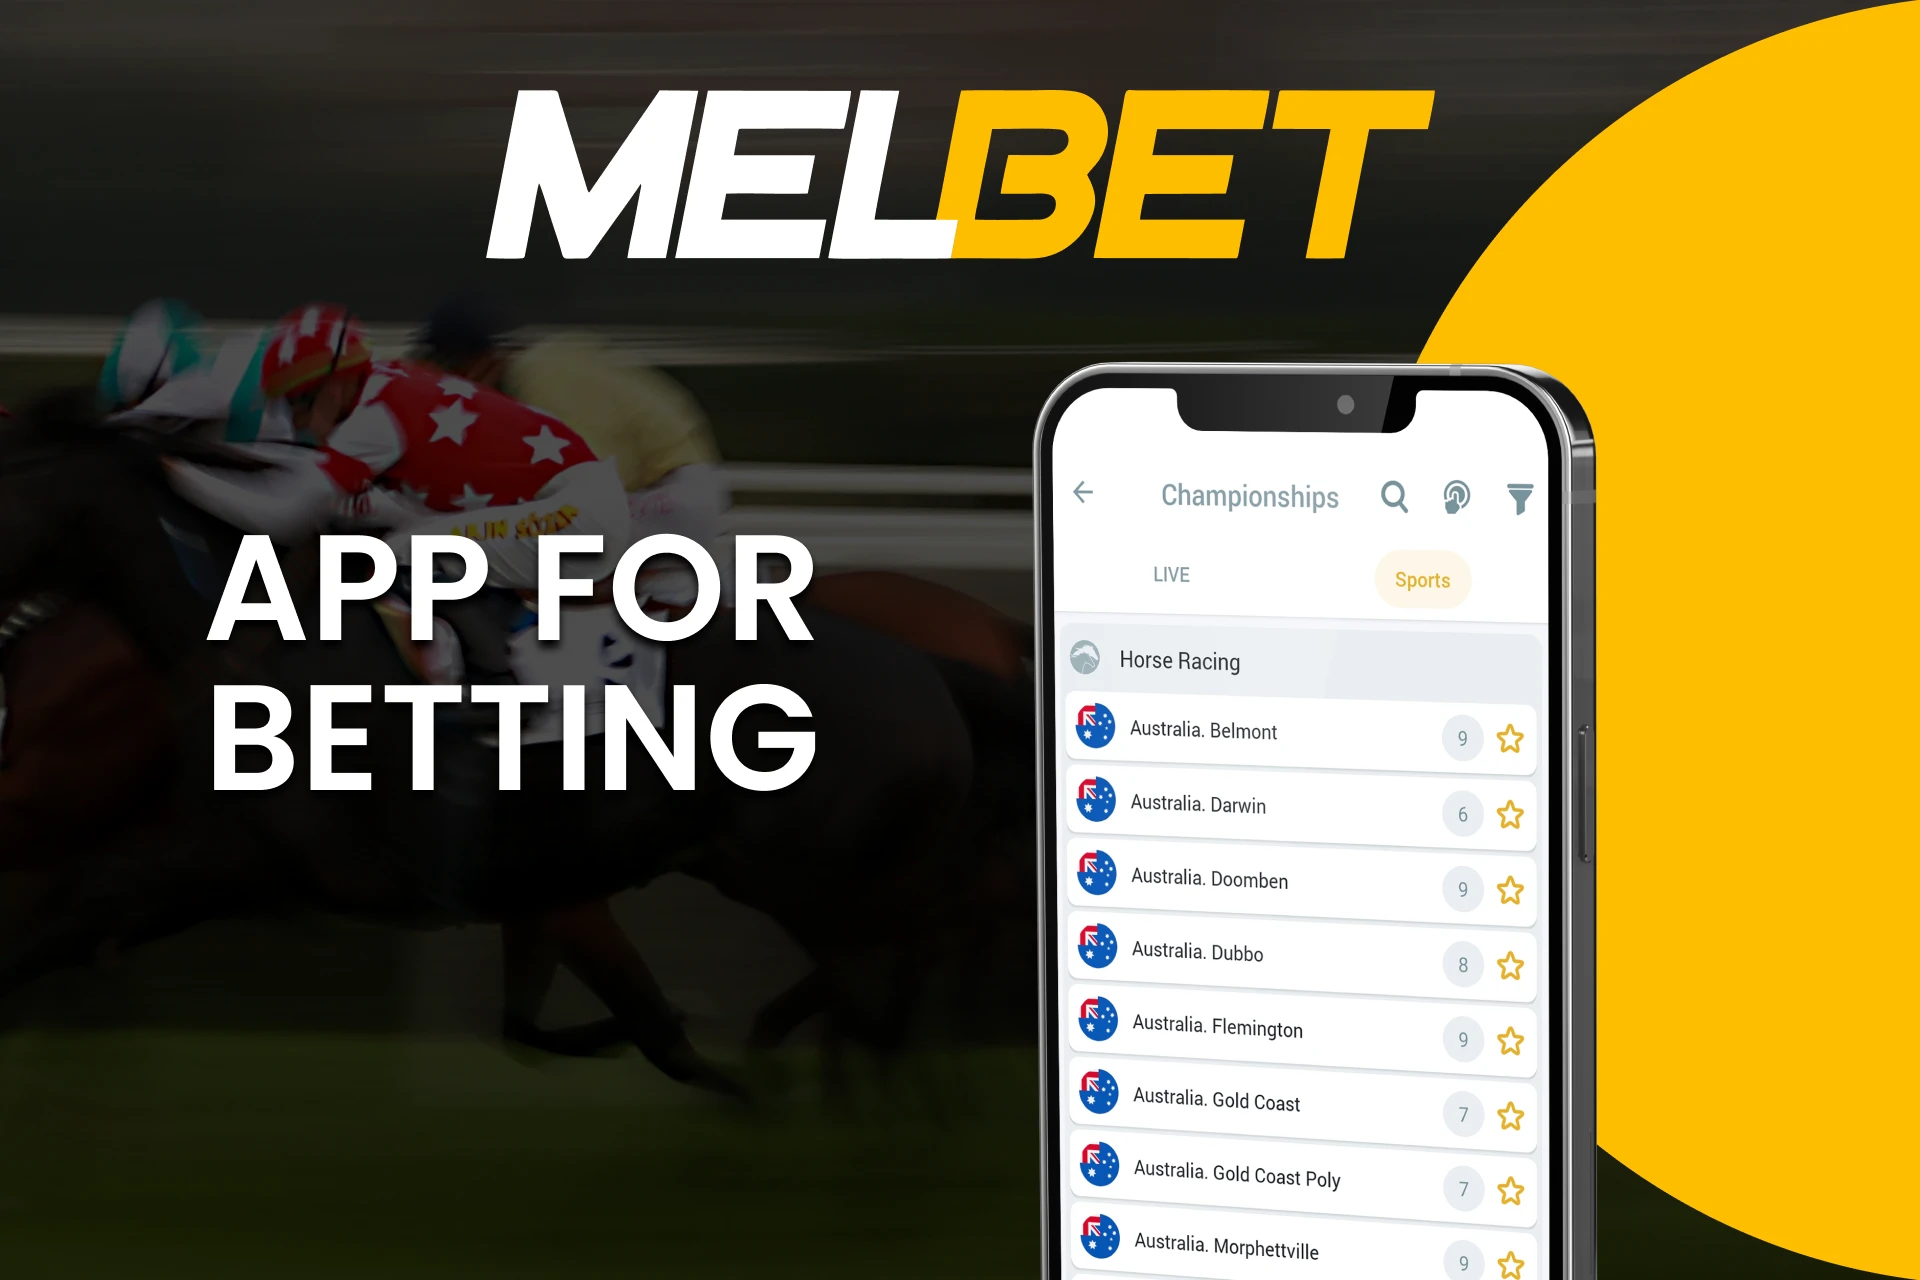 Use your phone to bet on horse races from Melbet.